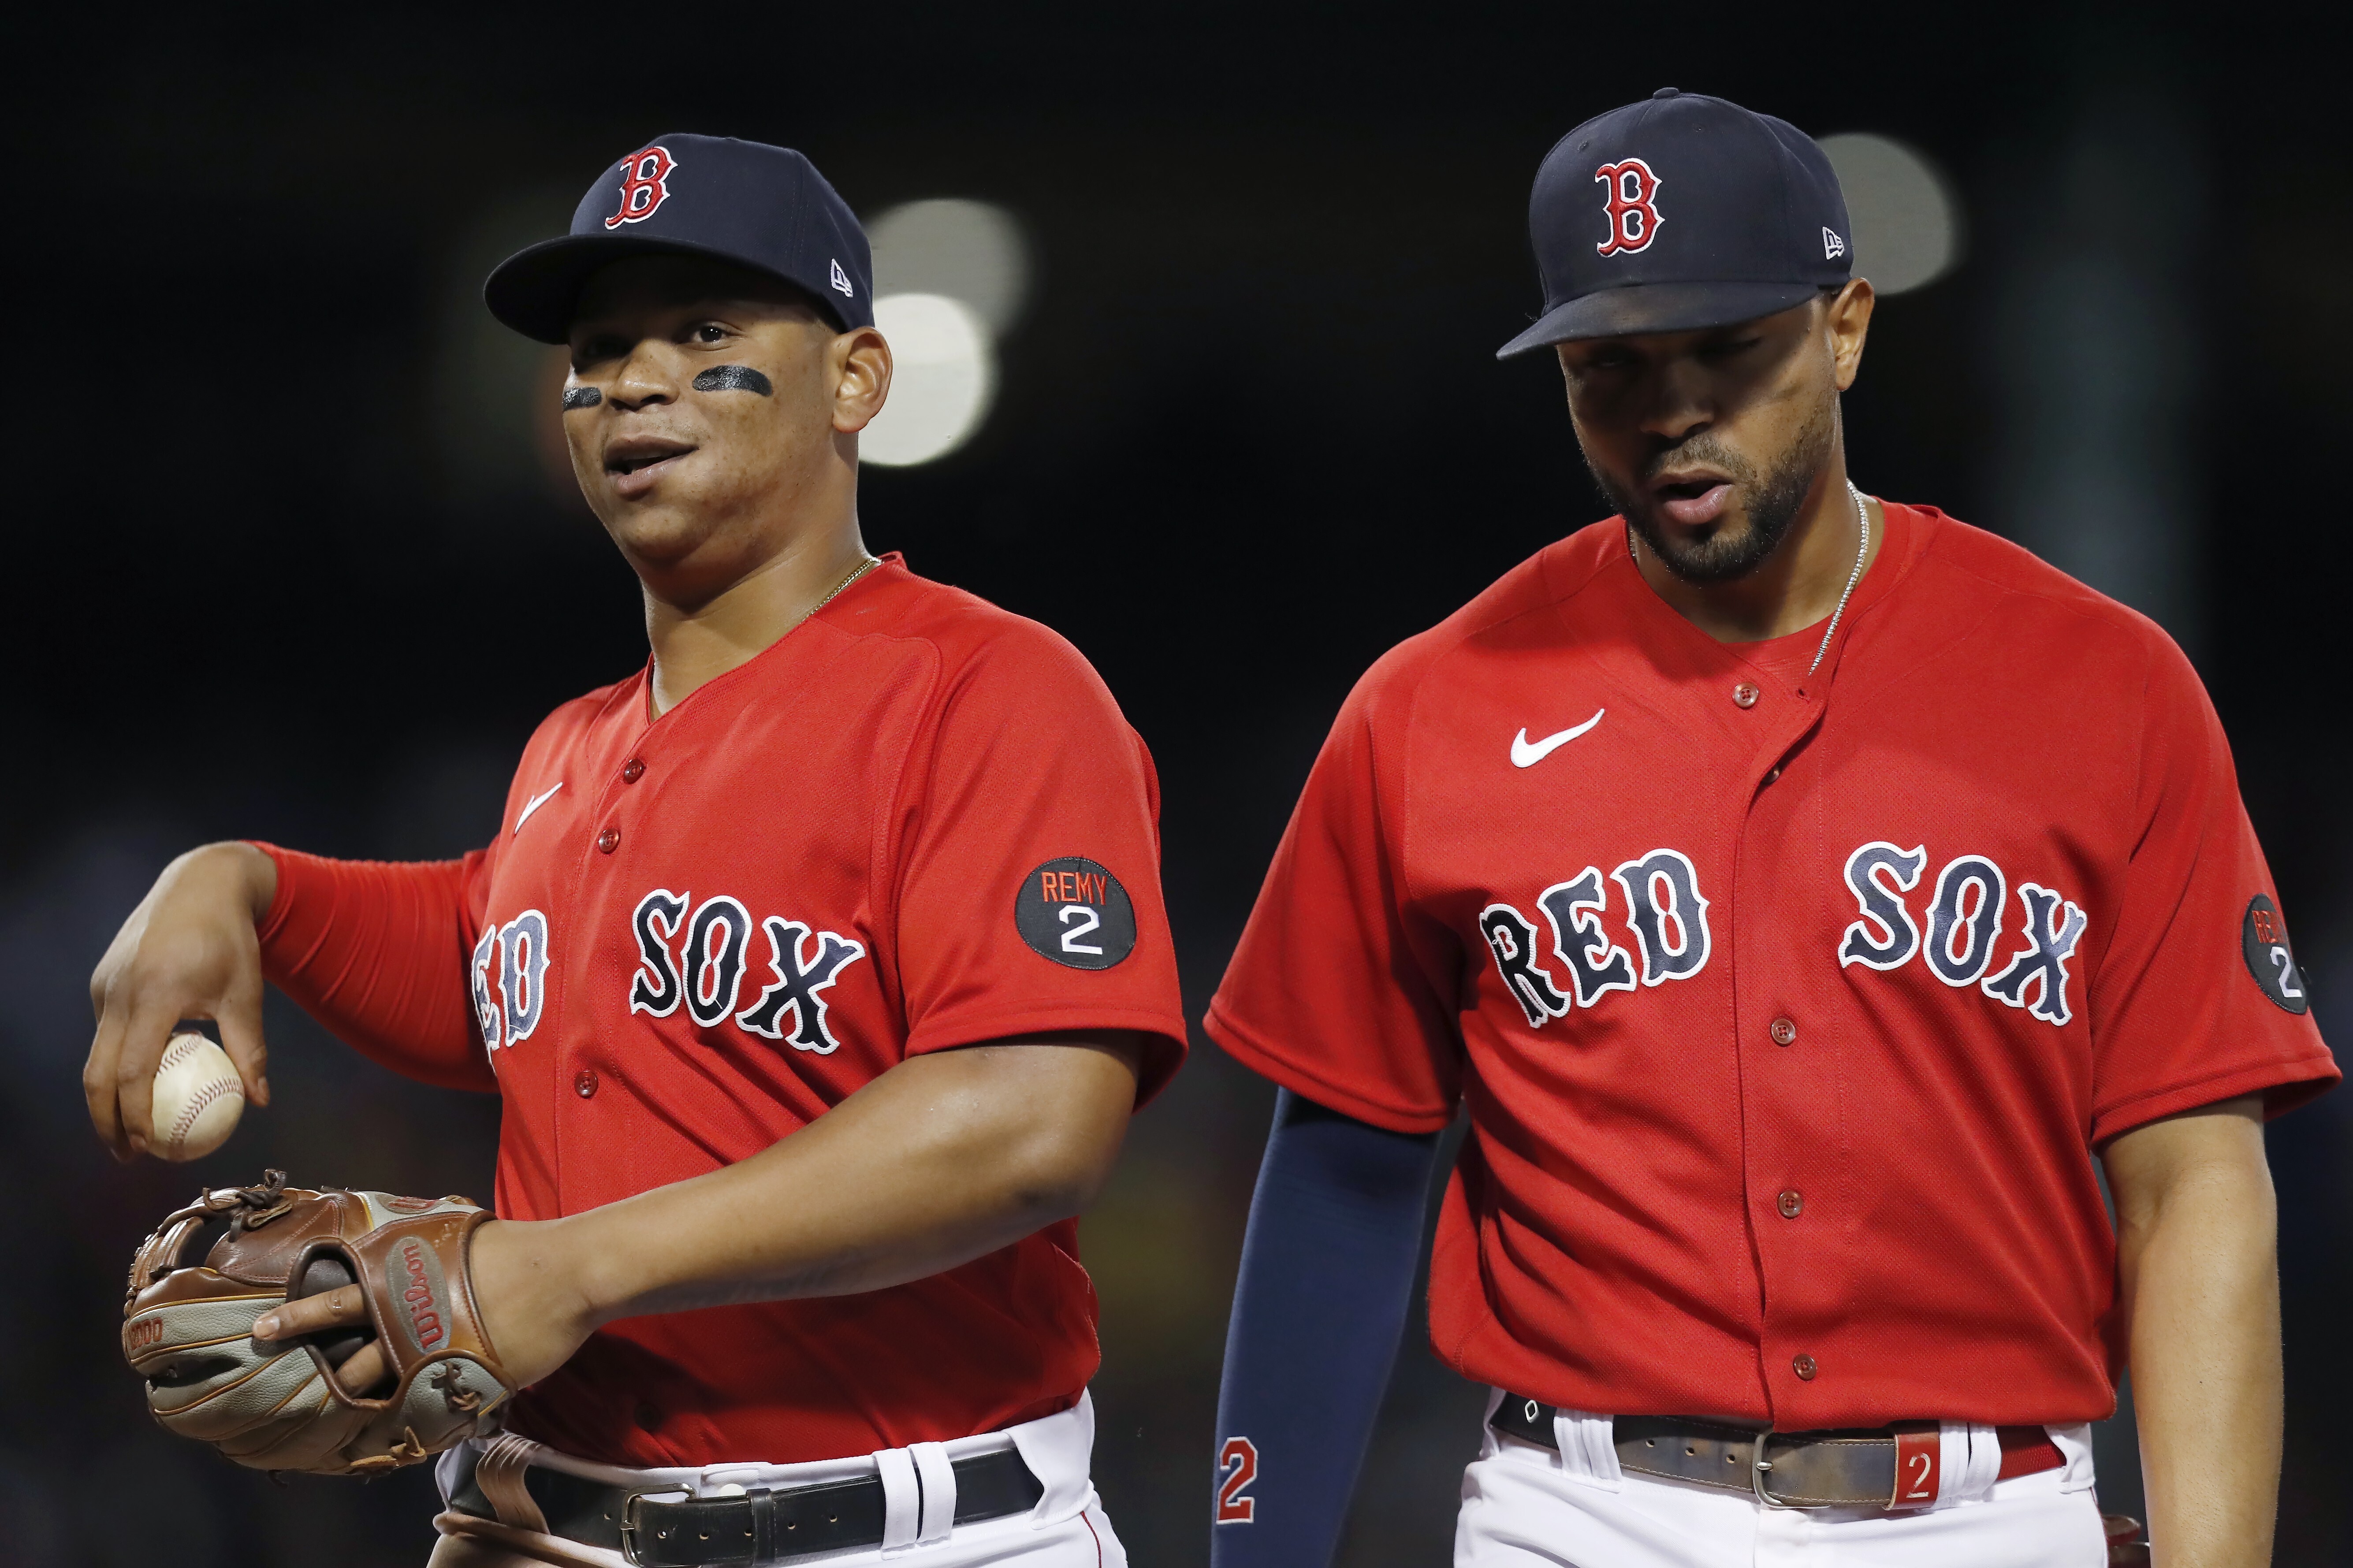 NESN - Xander Bogaerts has been on fire for Boston over his last